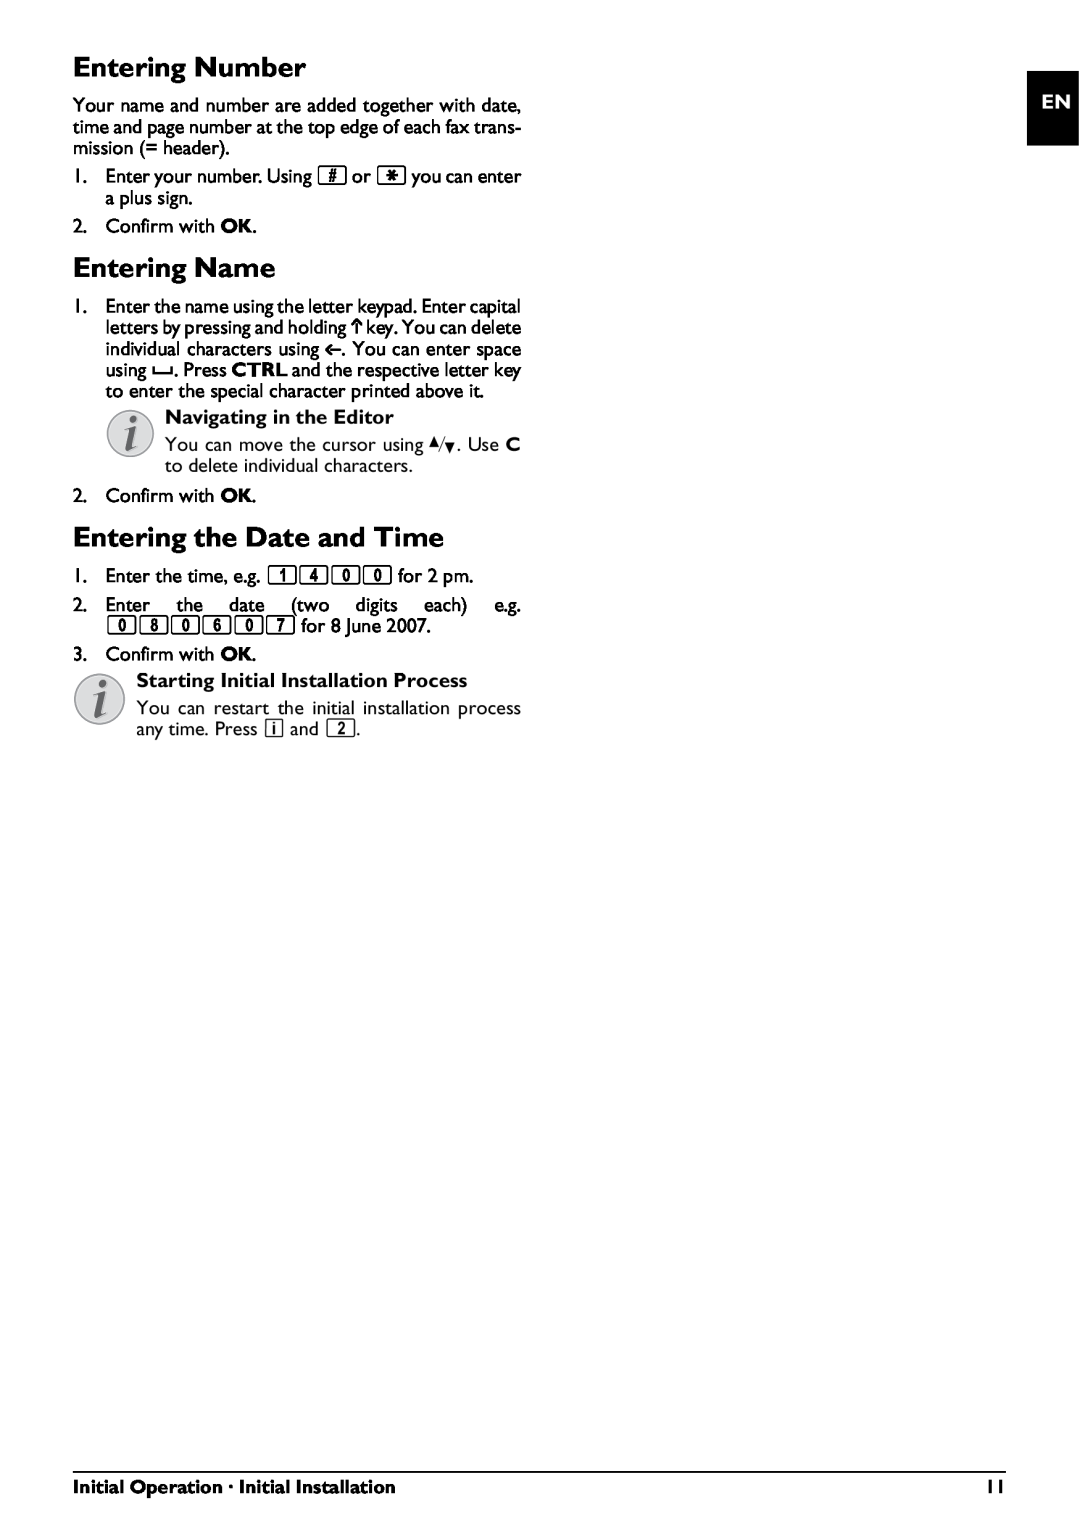 Philips PPF 725, PPF 755 user manual Entering Number, Entering Name, Entering the Date and Time, Navigating in the Editor 